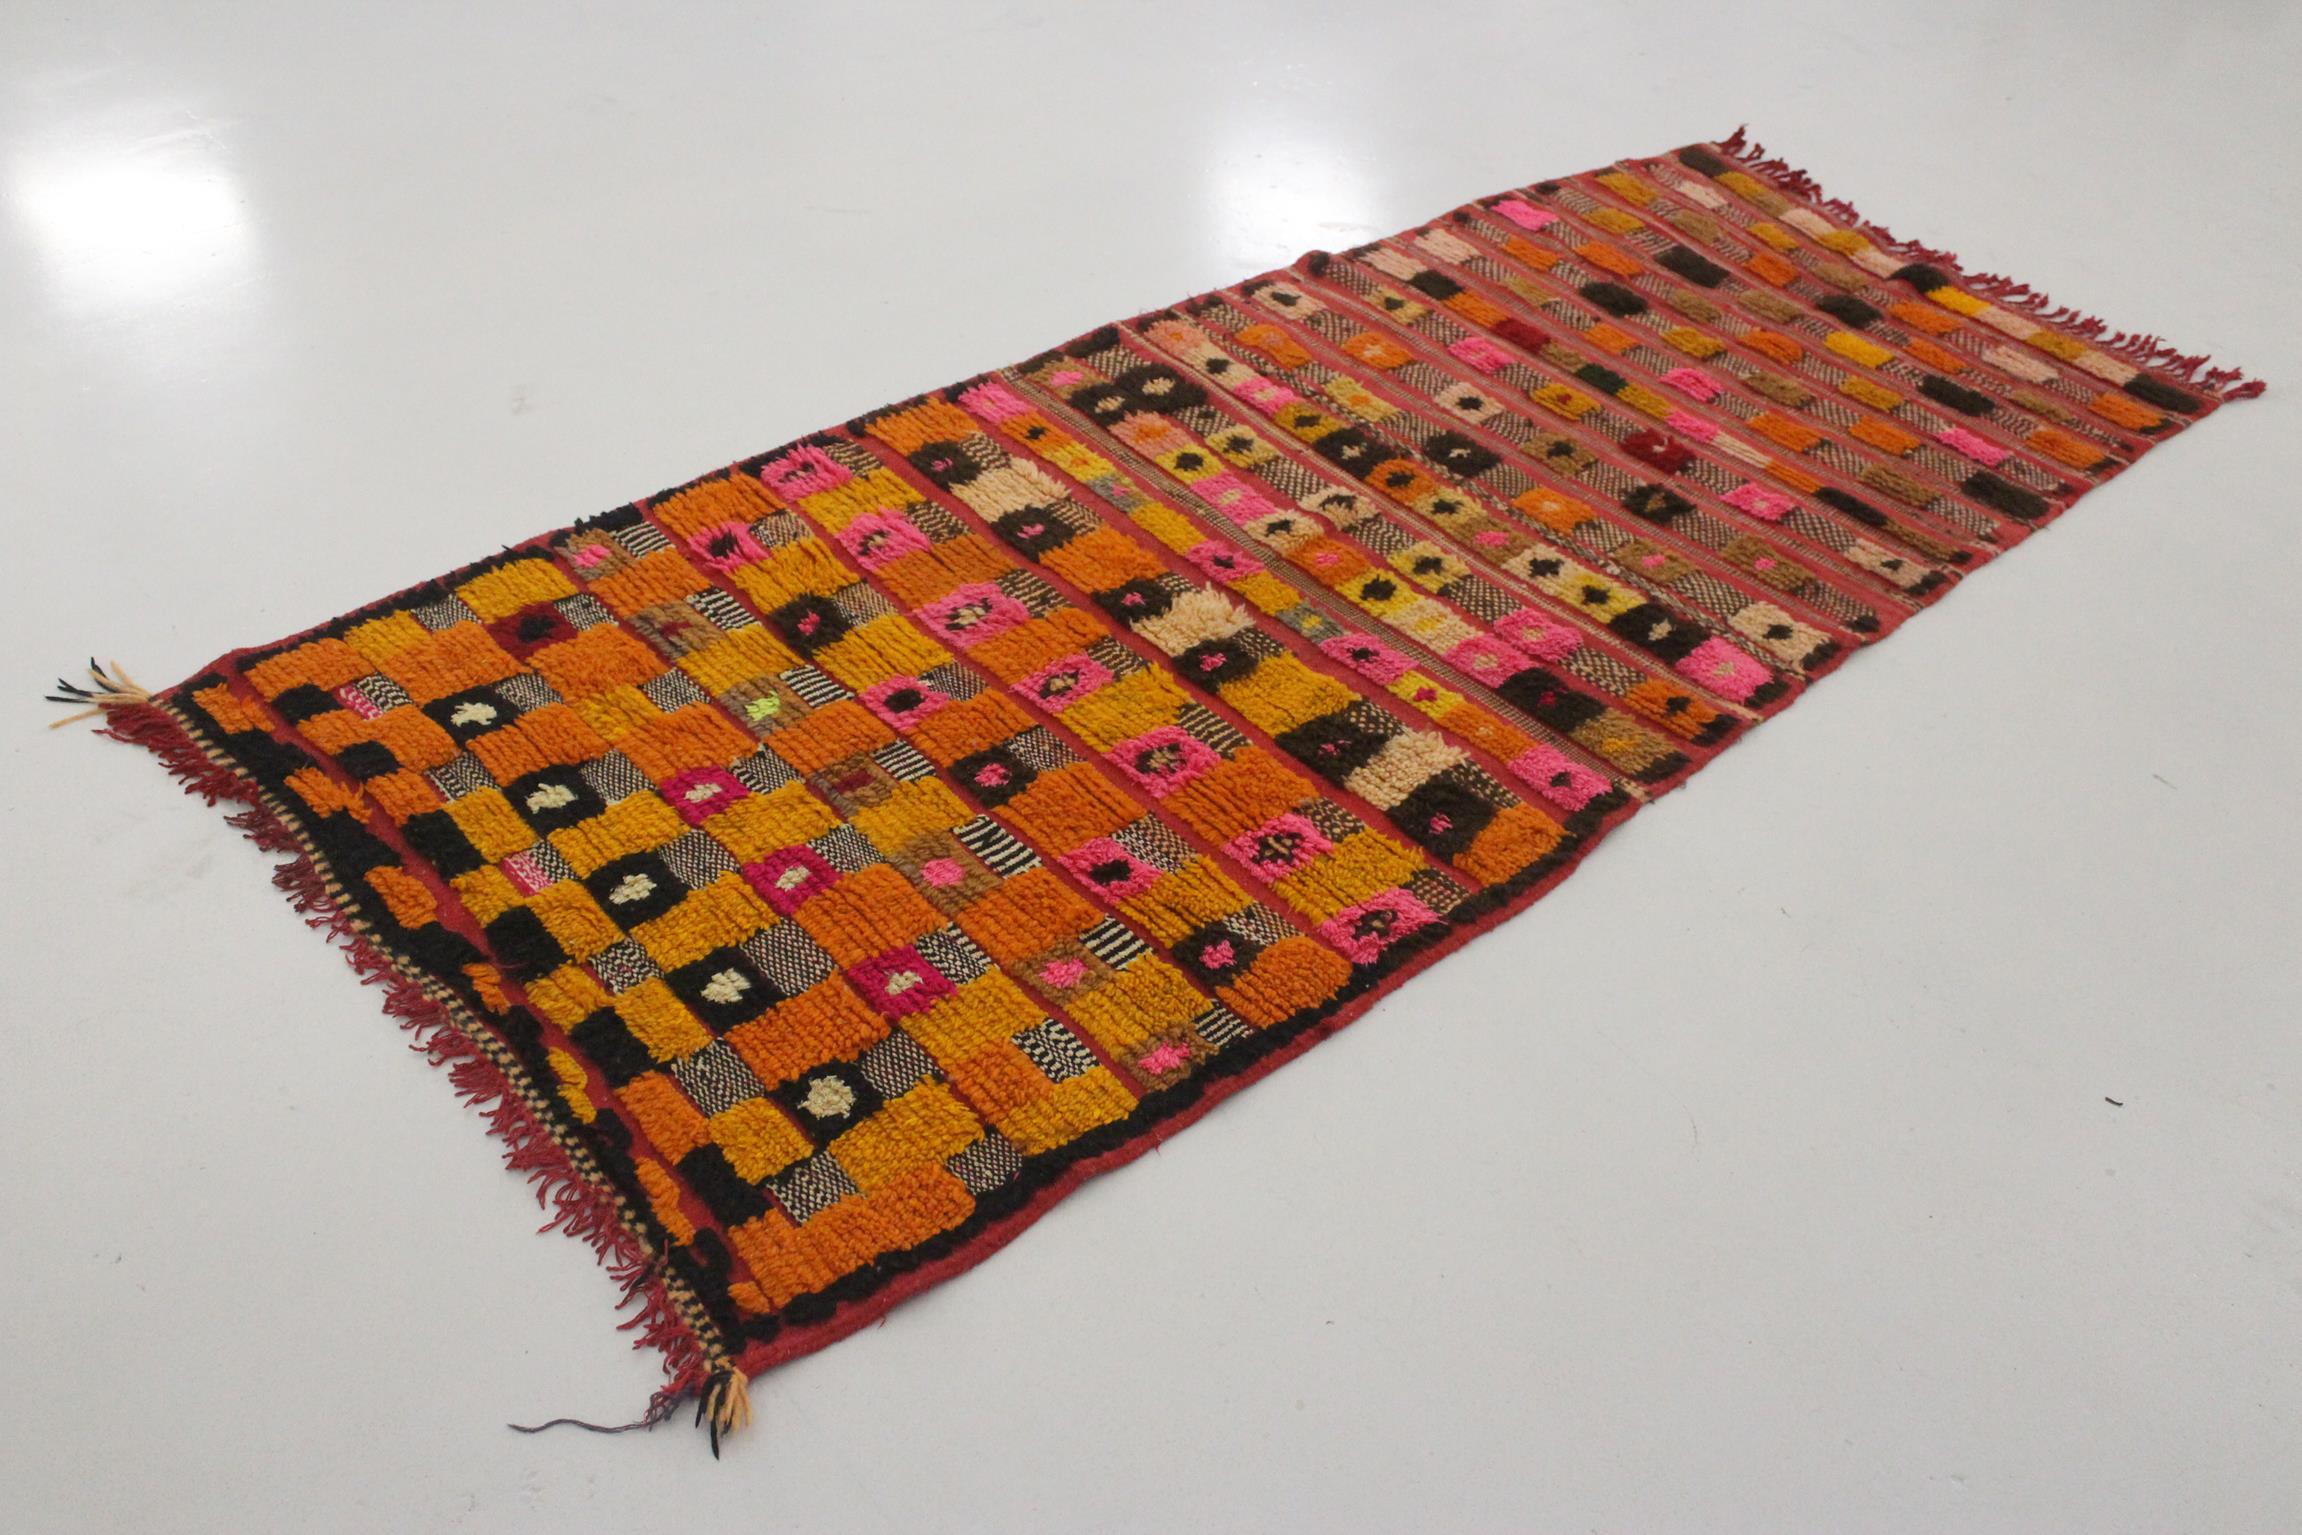 Tribal Vintage Moroccan Azilal rug - Red, orange, yellow - 3.3x7.7feet / 102x235cm For Sale